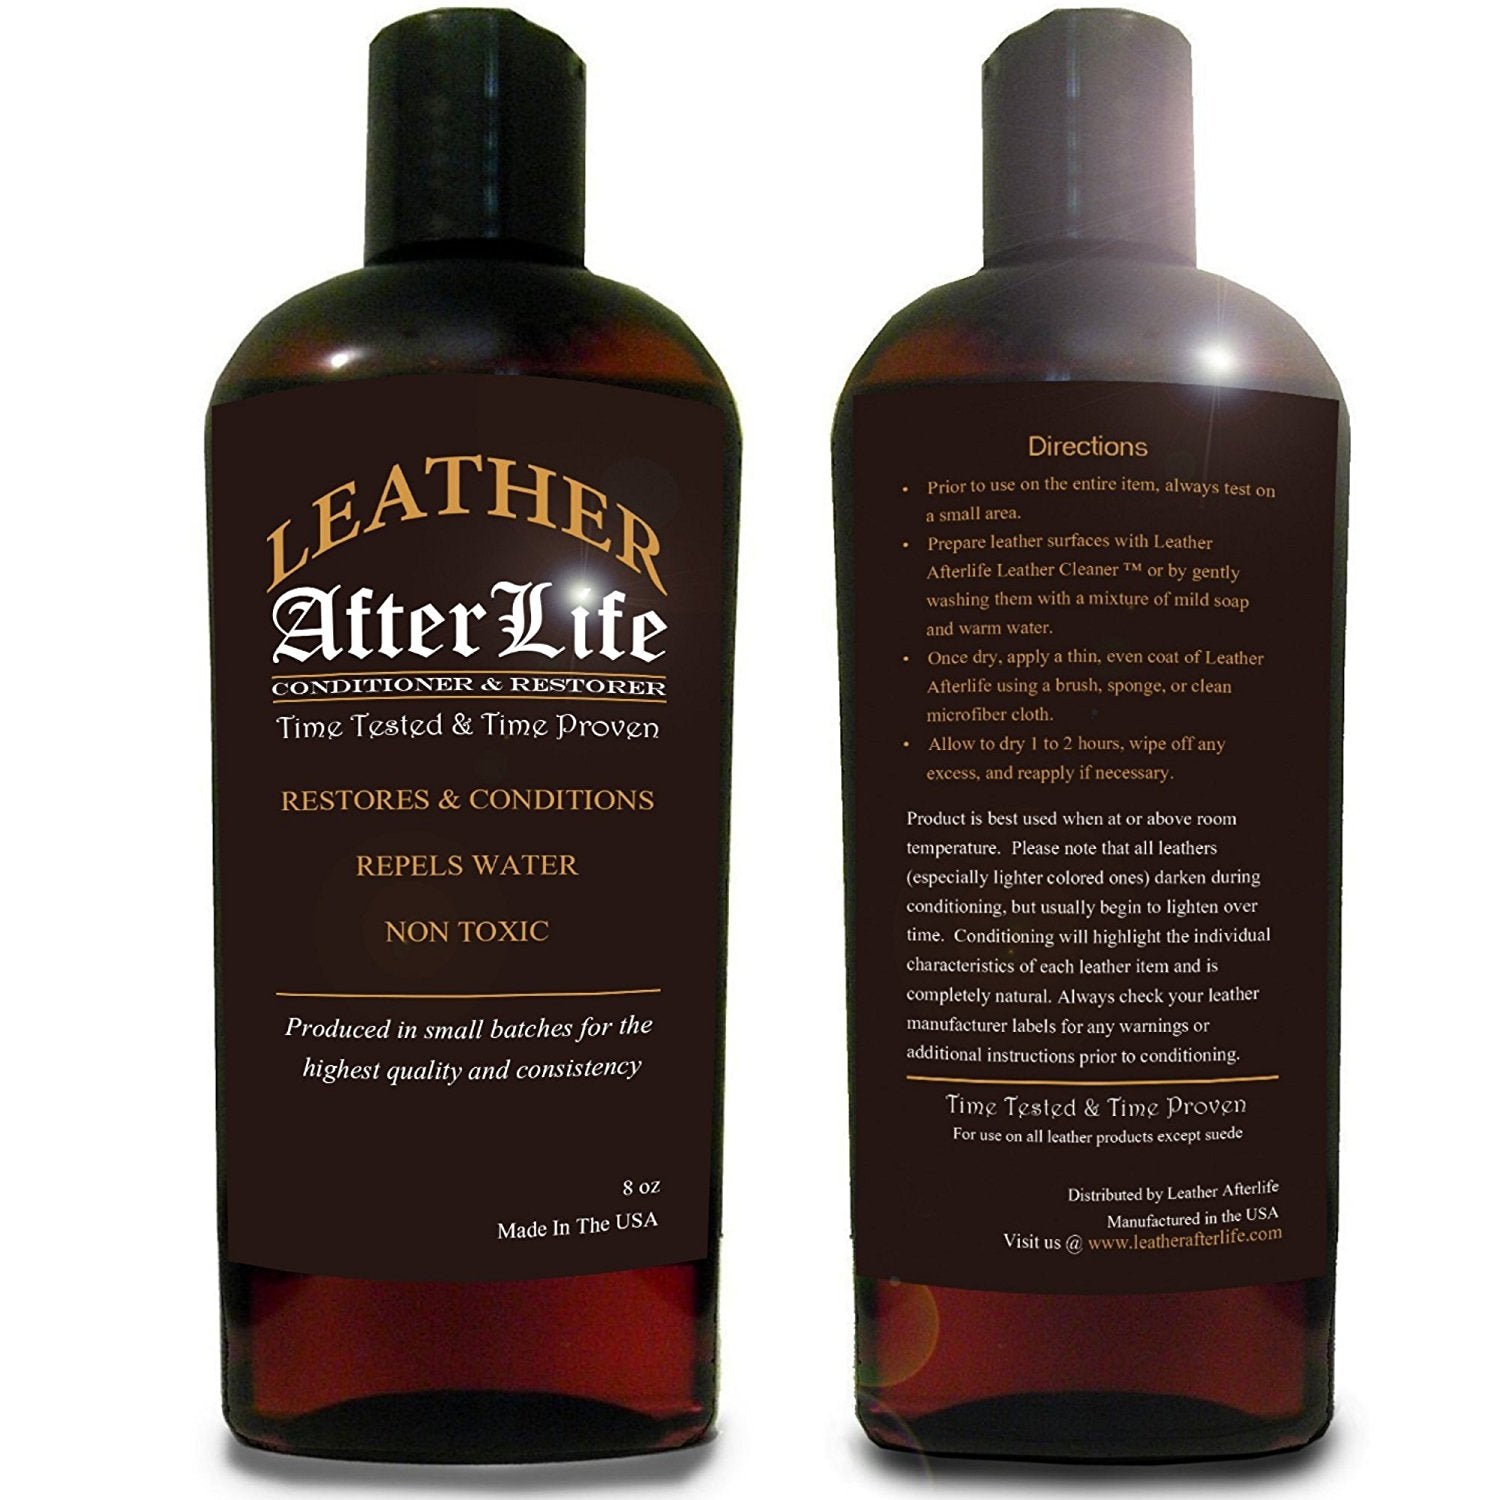 Leather Afterlife Leather Conditioner & Restorer - The Best Leather Protectant - Cars, Furniture, Seats, Shoes, Couch, Boots, Saddles Purses & More